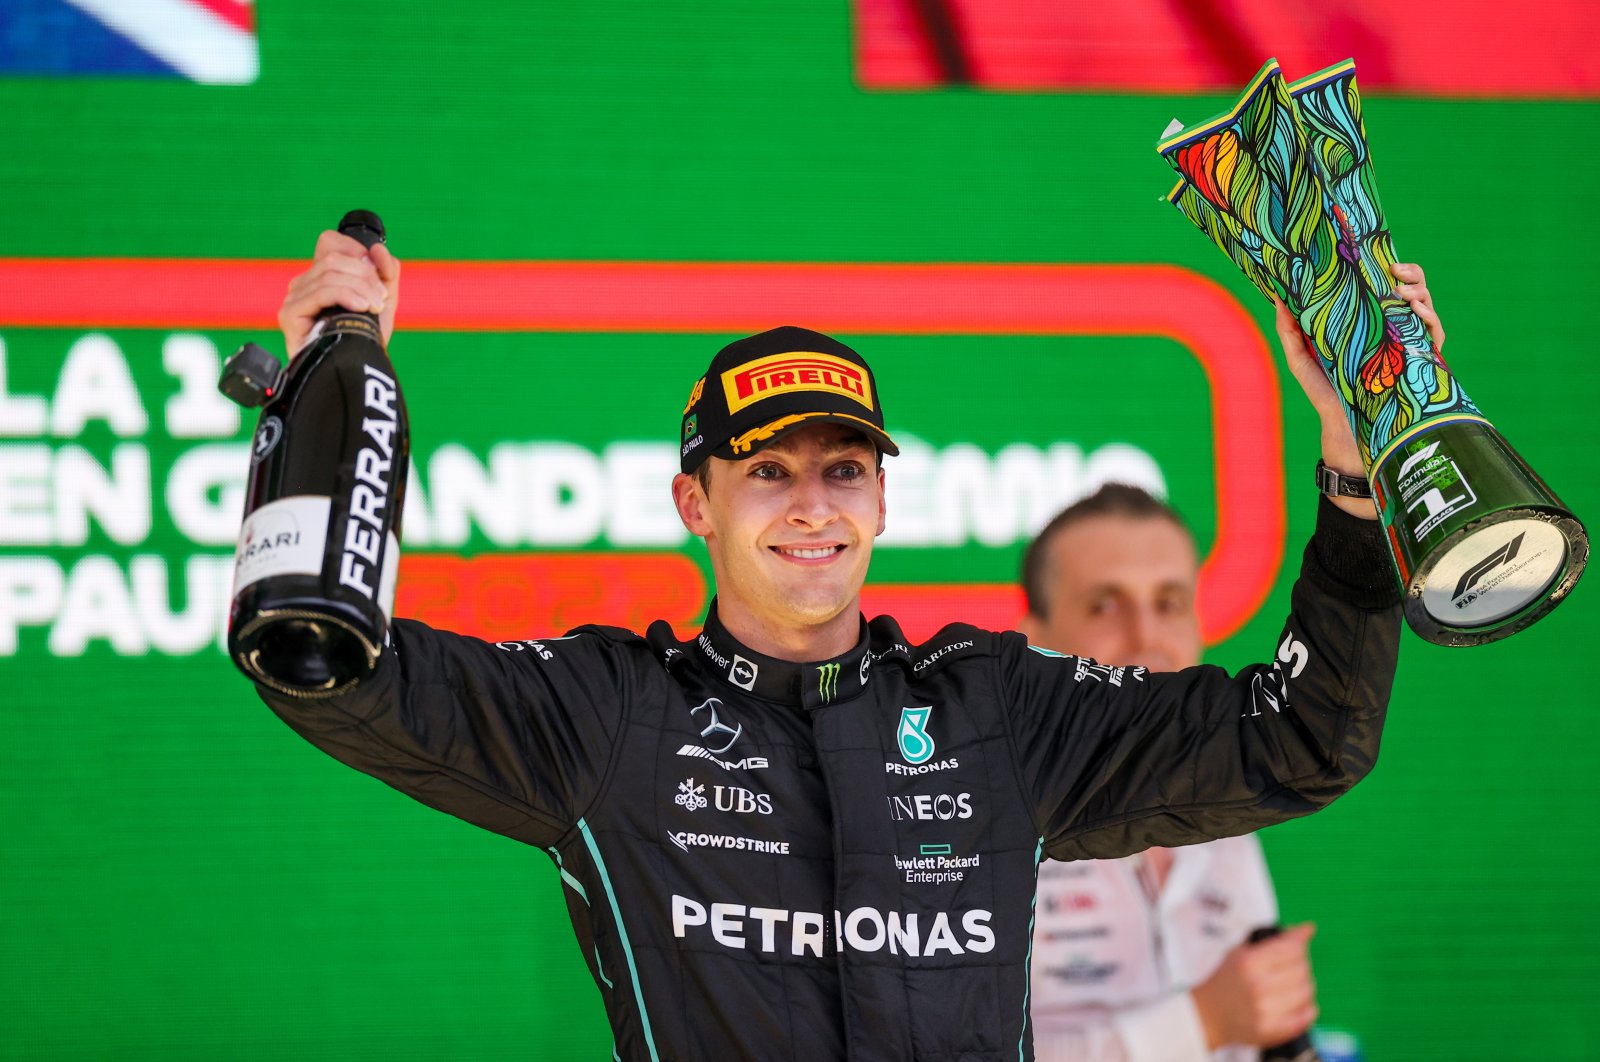 George Russell of Mercedes and Great Britain celebrates winning his first Grand Prix during the F1 Grand Prix of Brazil at Autodromo Jose Carlos Pace, Sao Paulo, Brazil, Nov. 13, 2022. (Getty Images Photo)